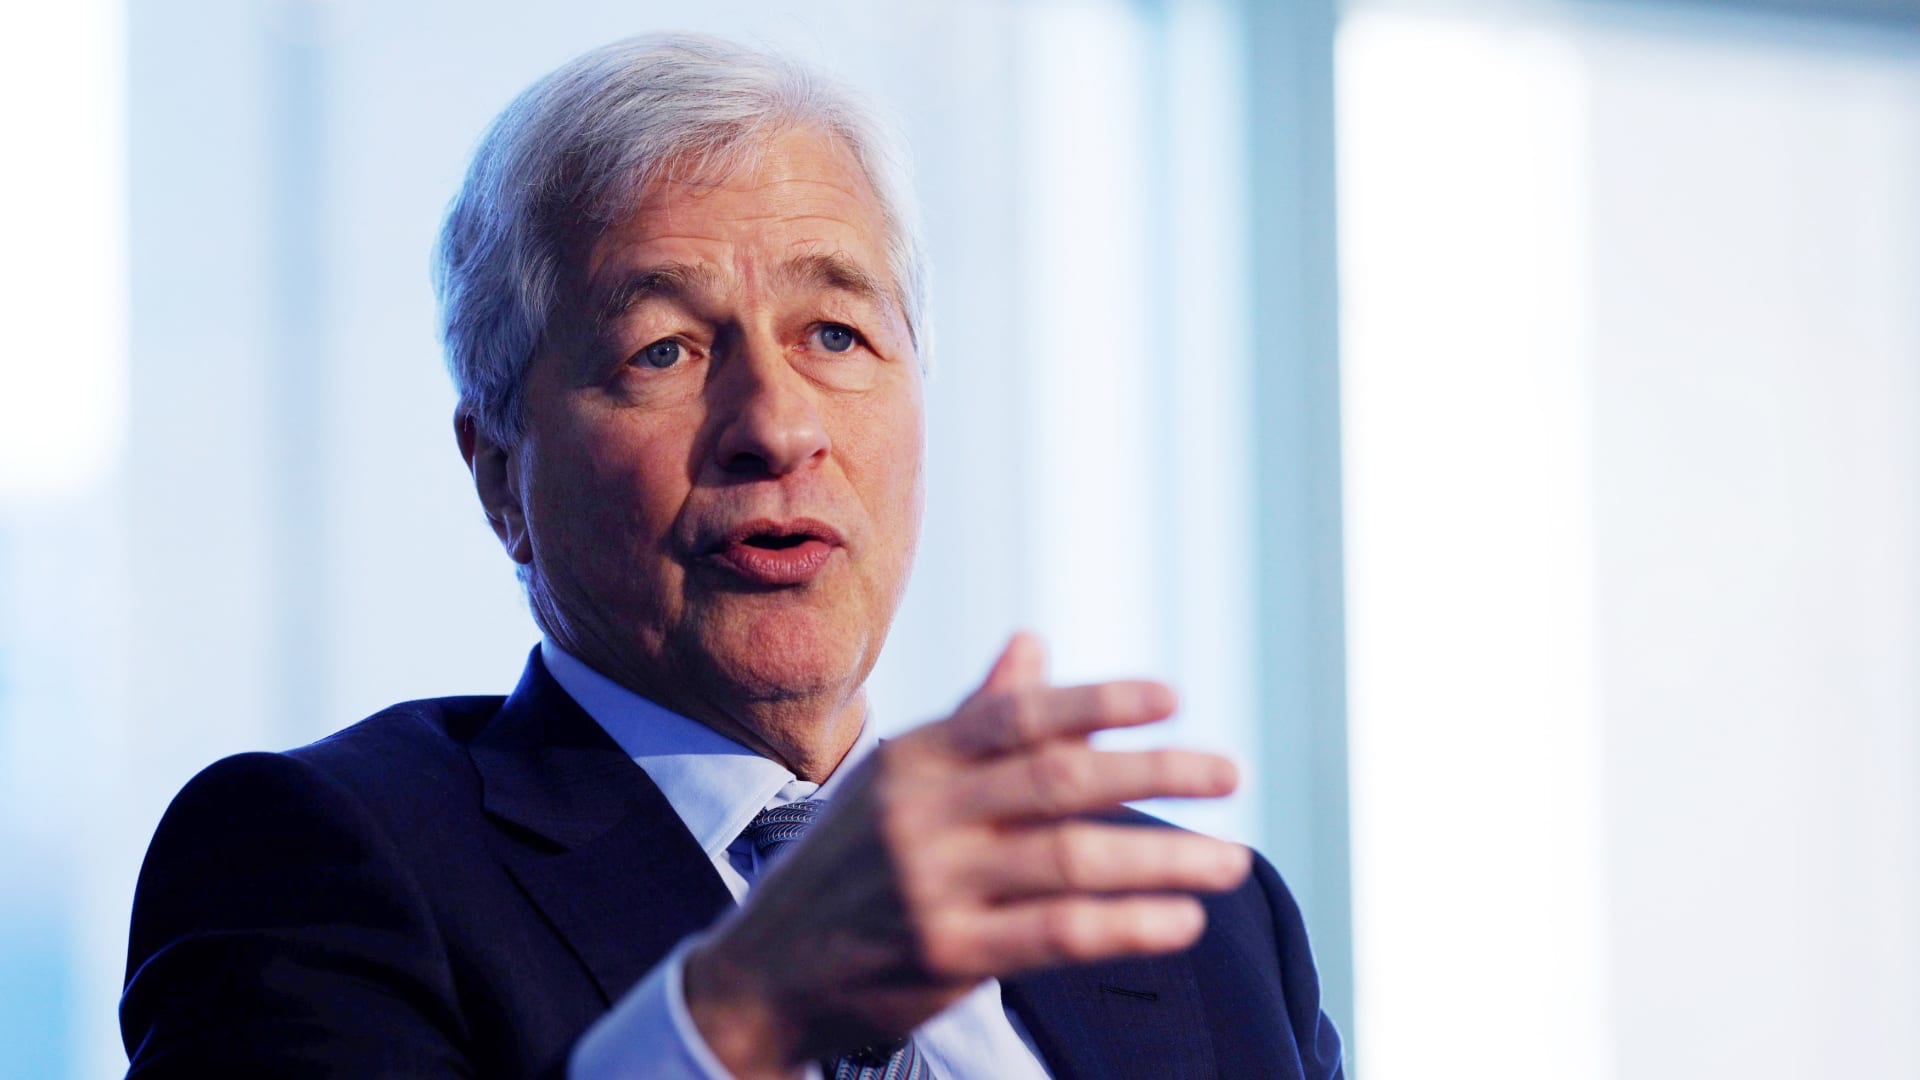 JPMorgan Chase tells employees that the bank will pay for travel to states that allow abortions